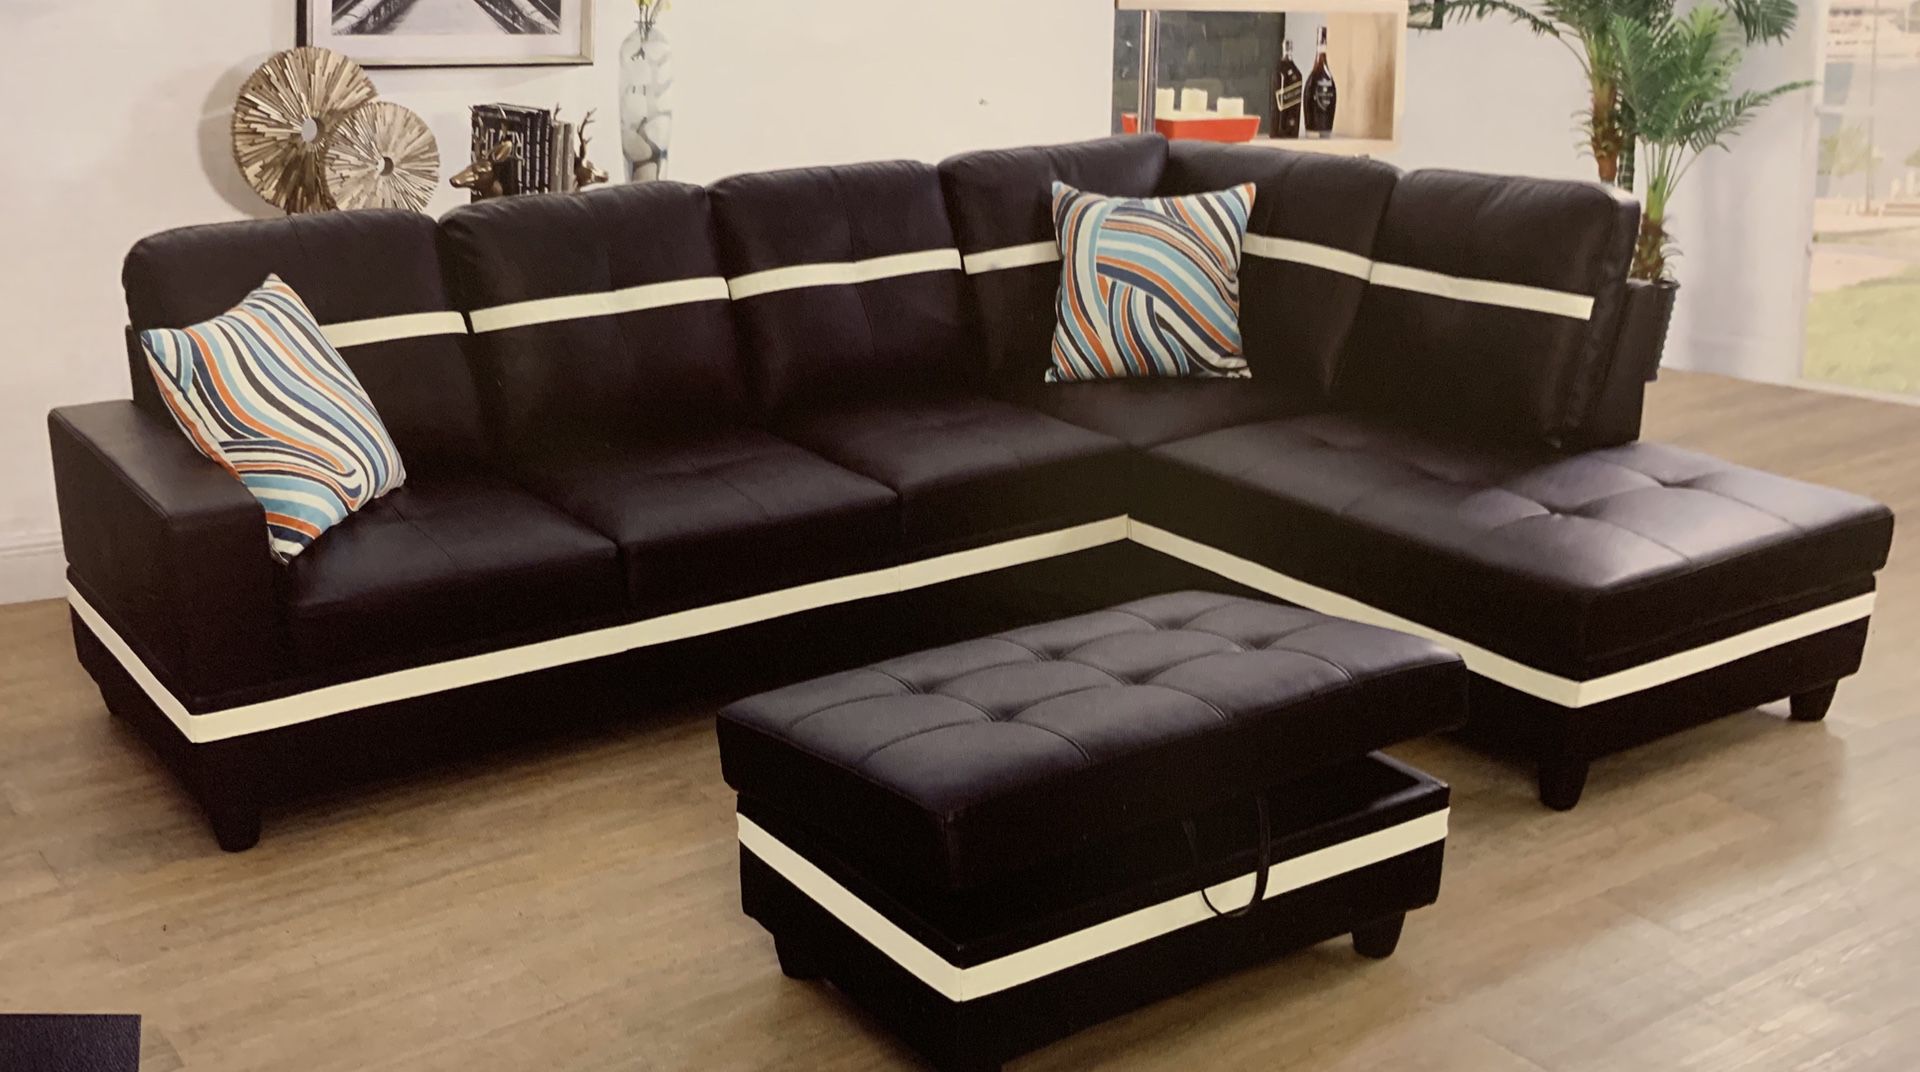 New Black With White Faux Leather Sectional Couch With Storage Ottoman